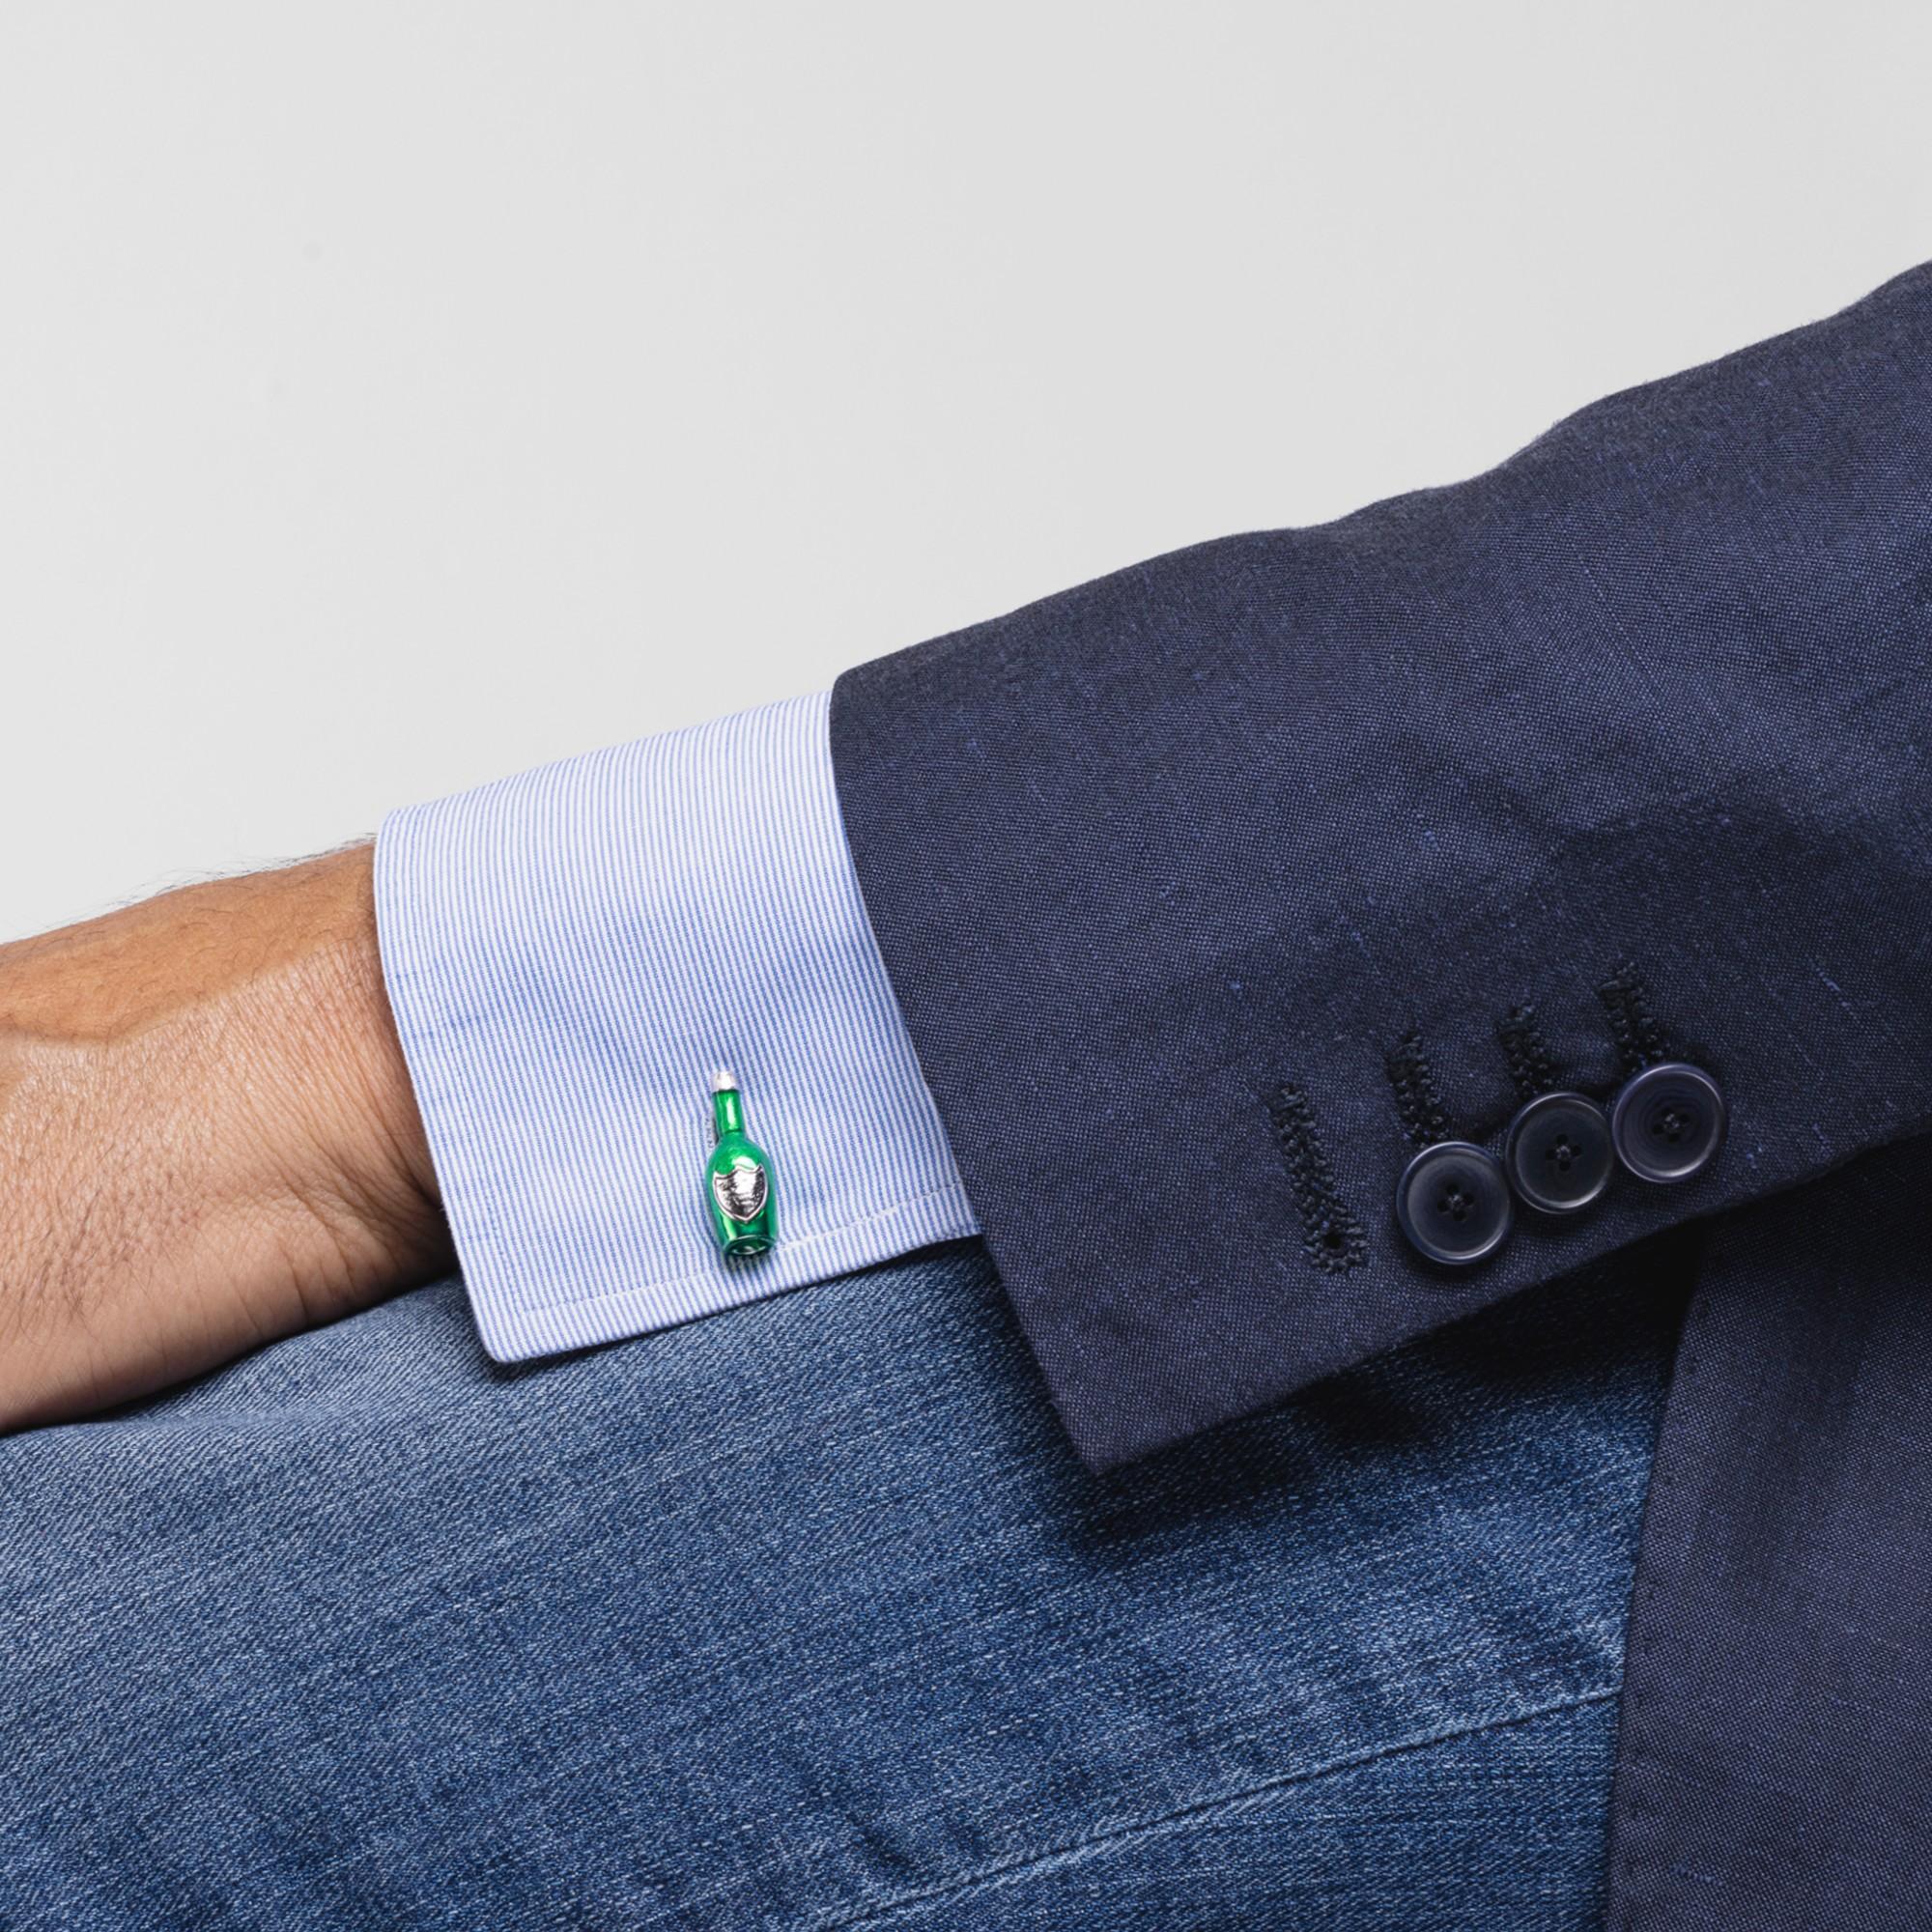 Celebrate with Alex Jona champagne bottle cufflinks!
These sophisticated green champagne bottle cufflinks are perfect for special occasions. They have been designed by Alex Jona, hand crafted in Italy in sterling silver with green enamel and feature